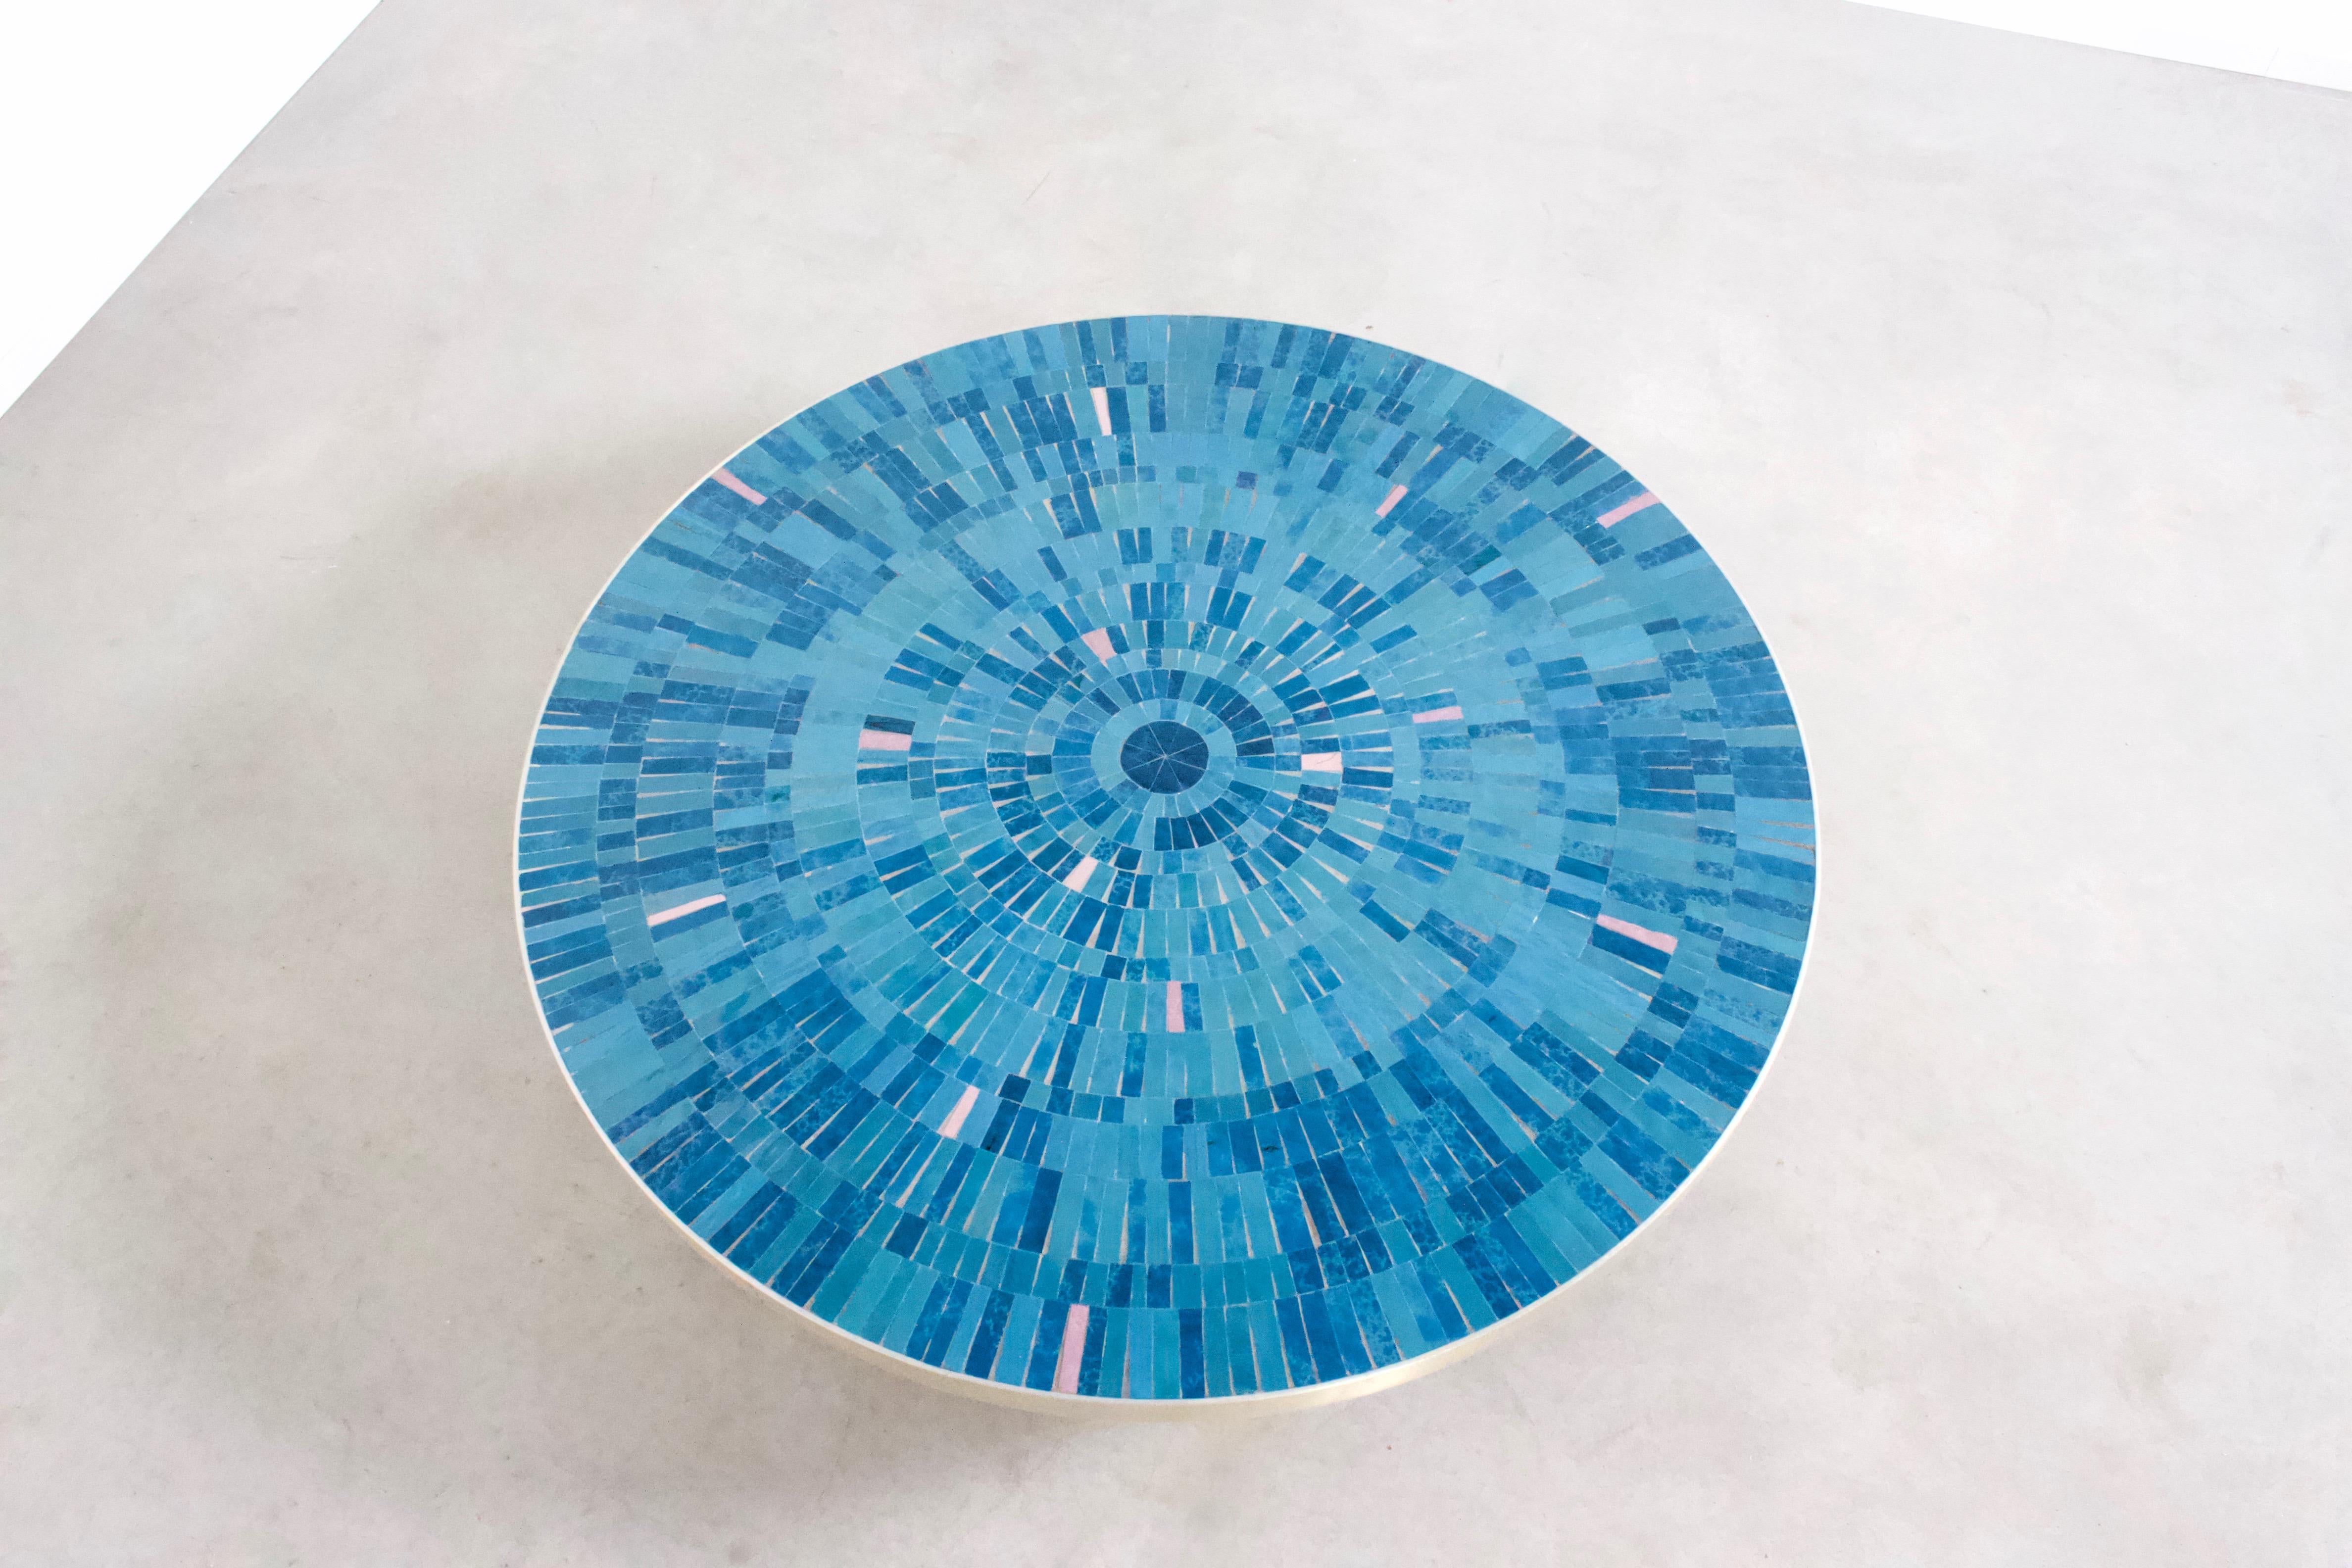 Impressive coffee table by Berthold Müller in excellent condition.

Manufactured by Mosaikwerkstatt Berthold Müller-Oerlinghaus

The round mosaic top of this table is composed of tiles in various colors of blue and pink.
The rim of the top is made